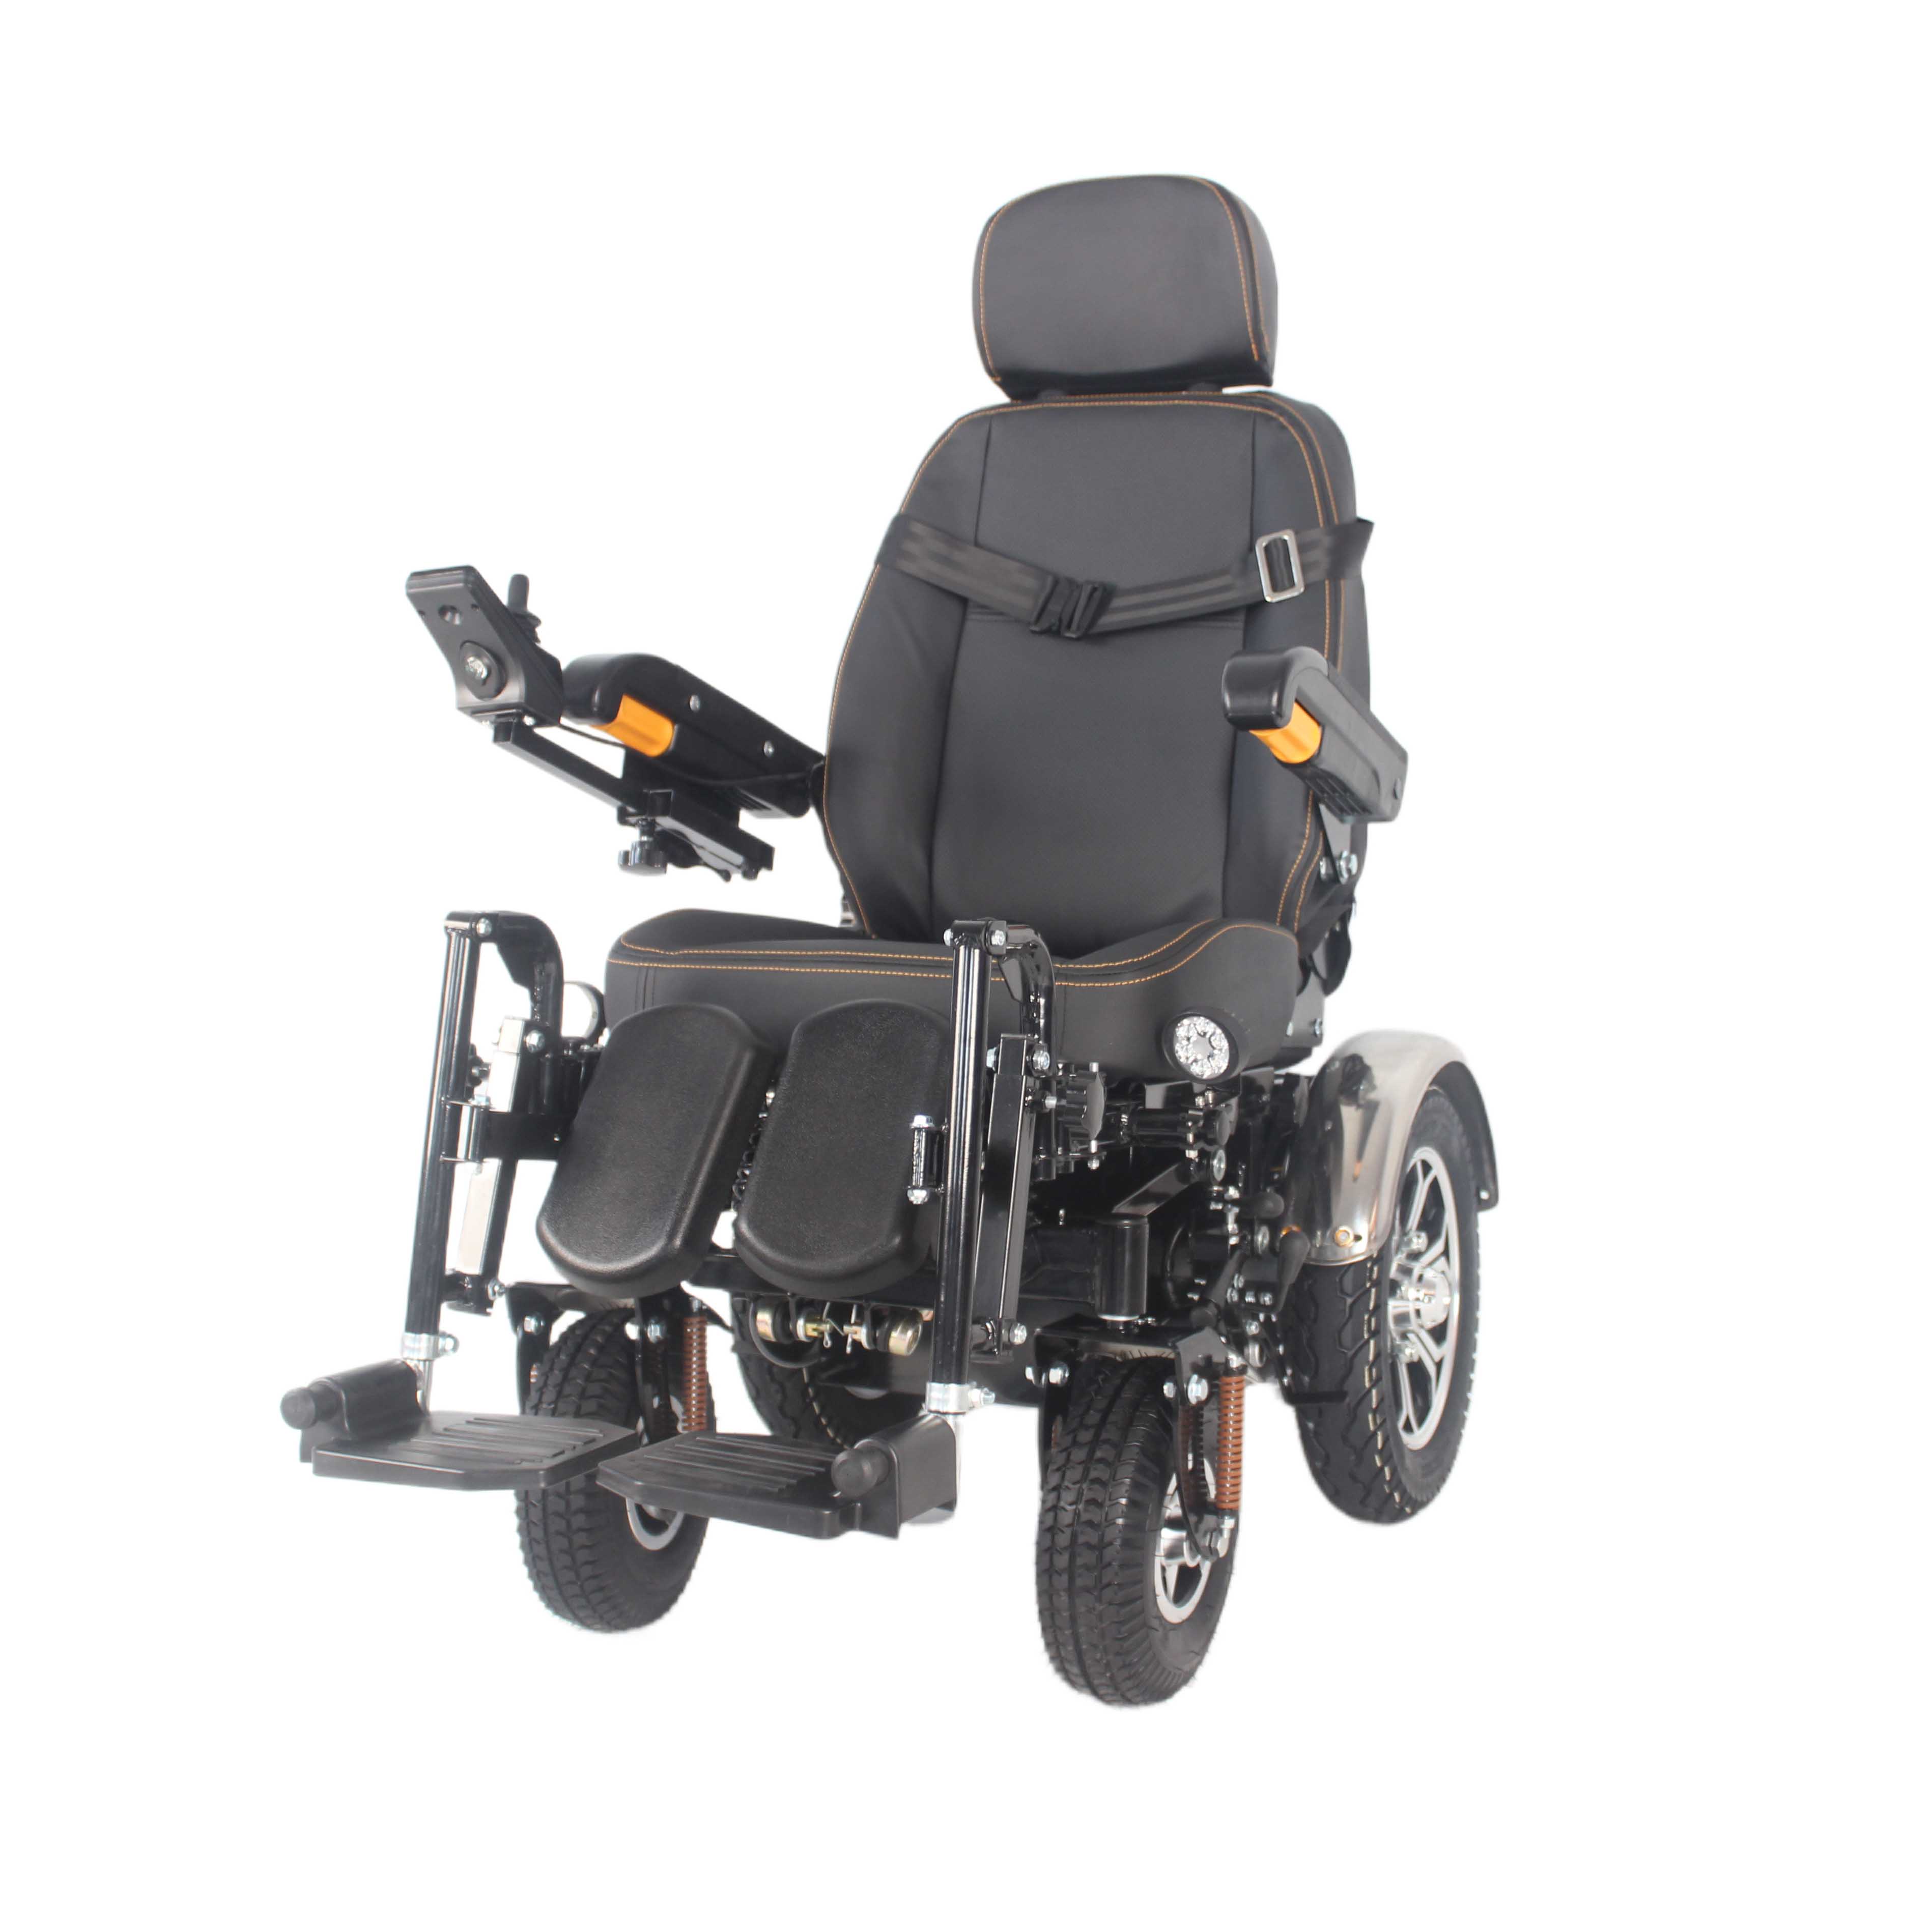 Wholesale DEW-001 Disabled Patient Lying Flat Electric Wheelchair for Disabled Elderly With Hemiplegia